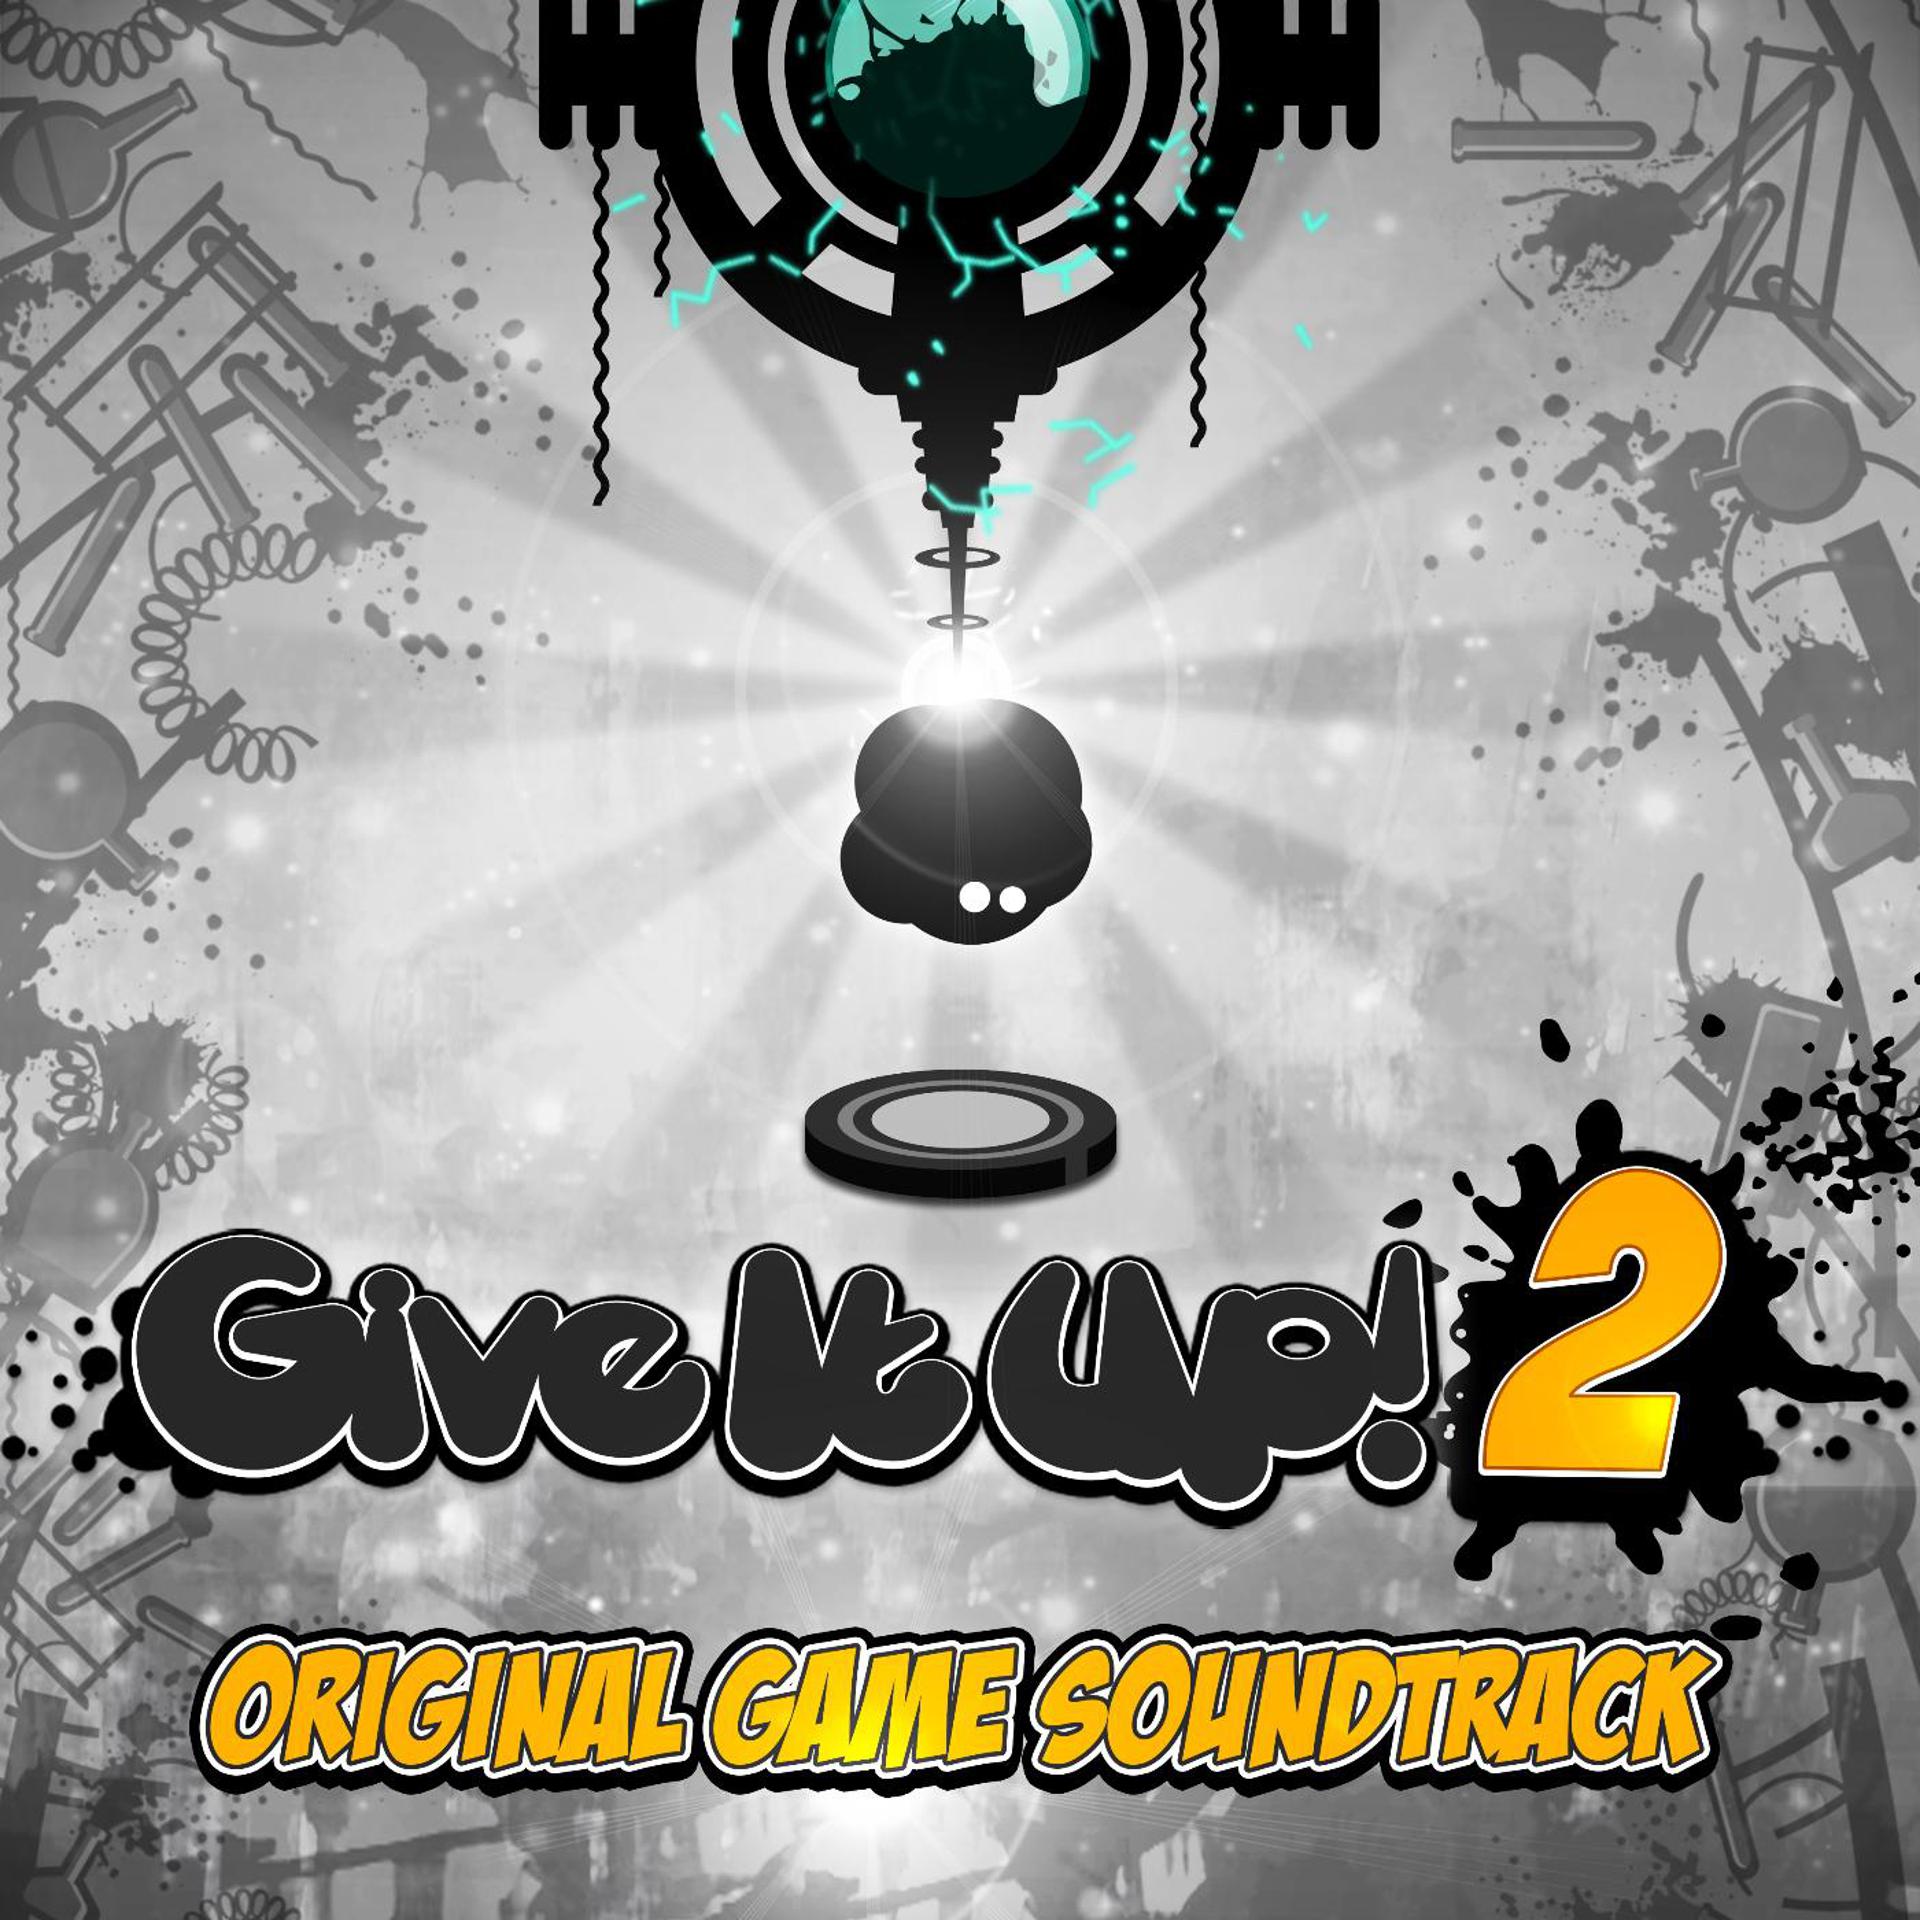 Give it up игра. Альбом give it up. Game Music. Give it up 2 игра oynash. Give your game